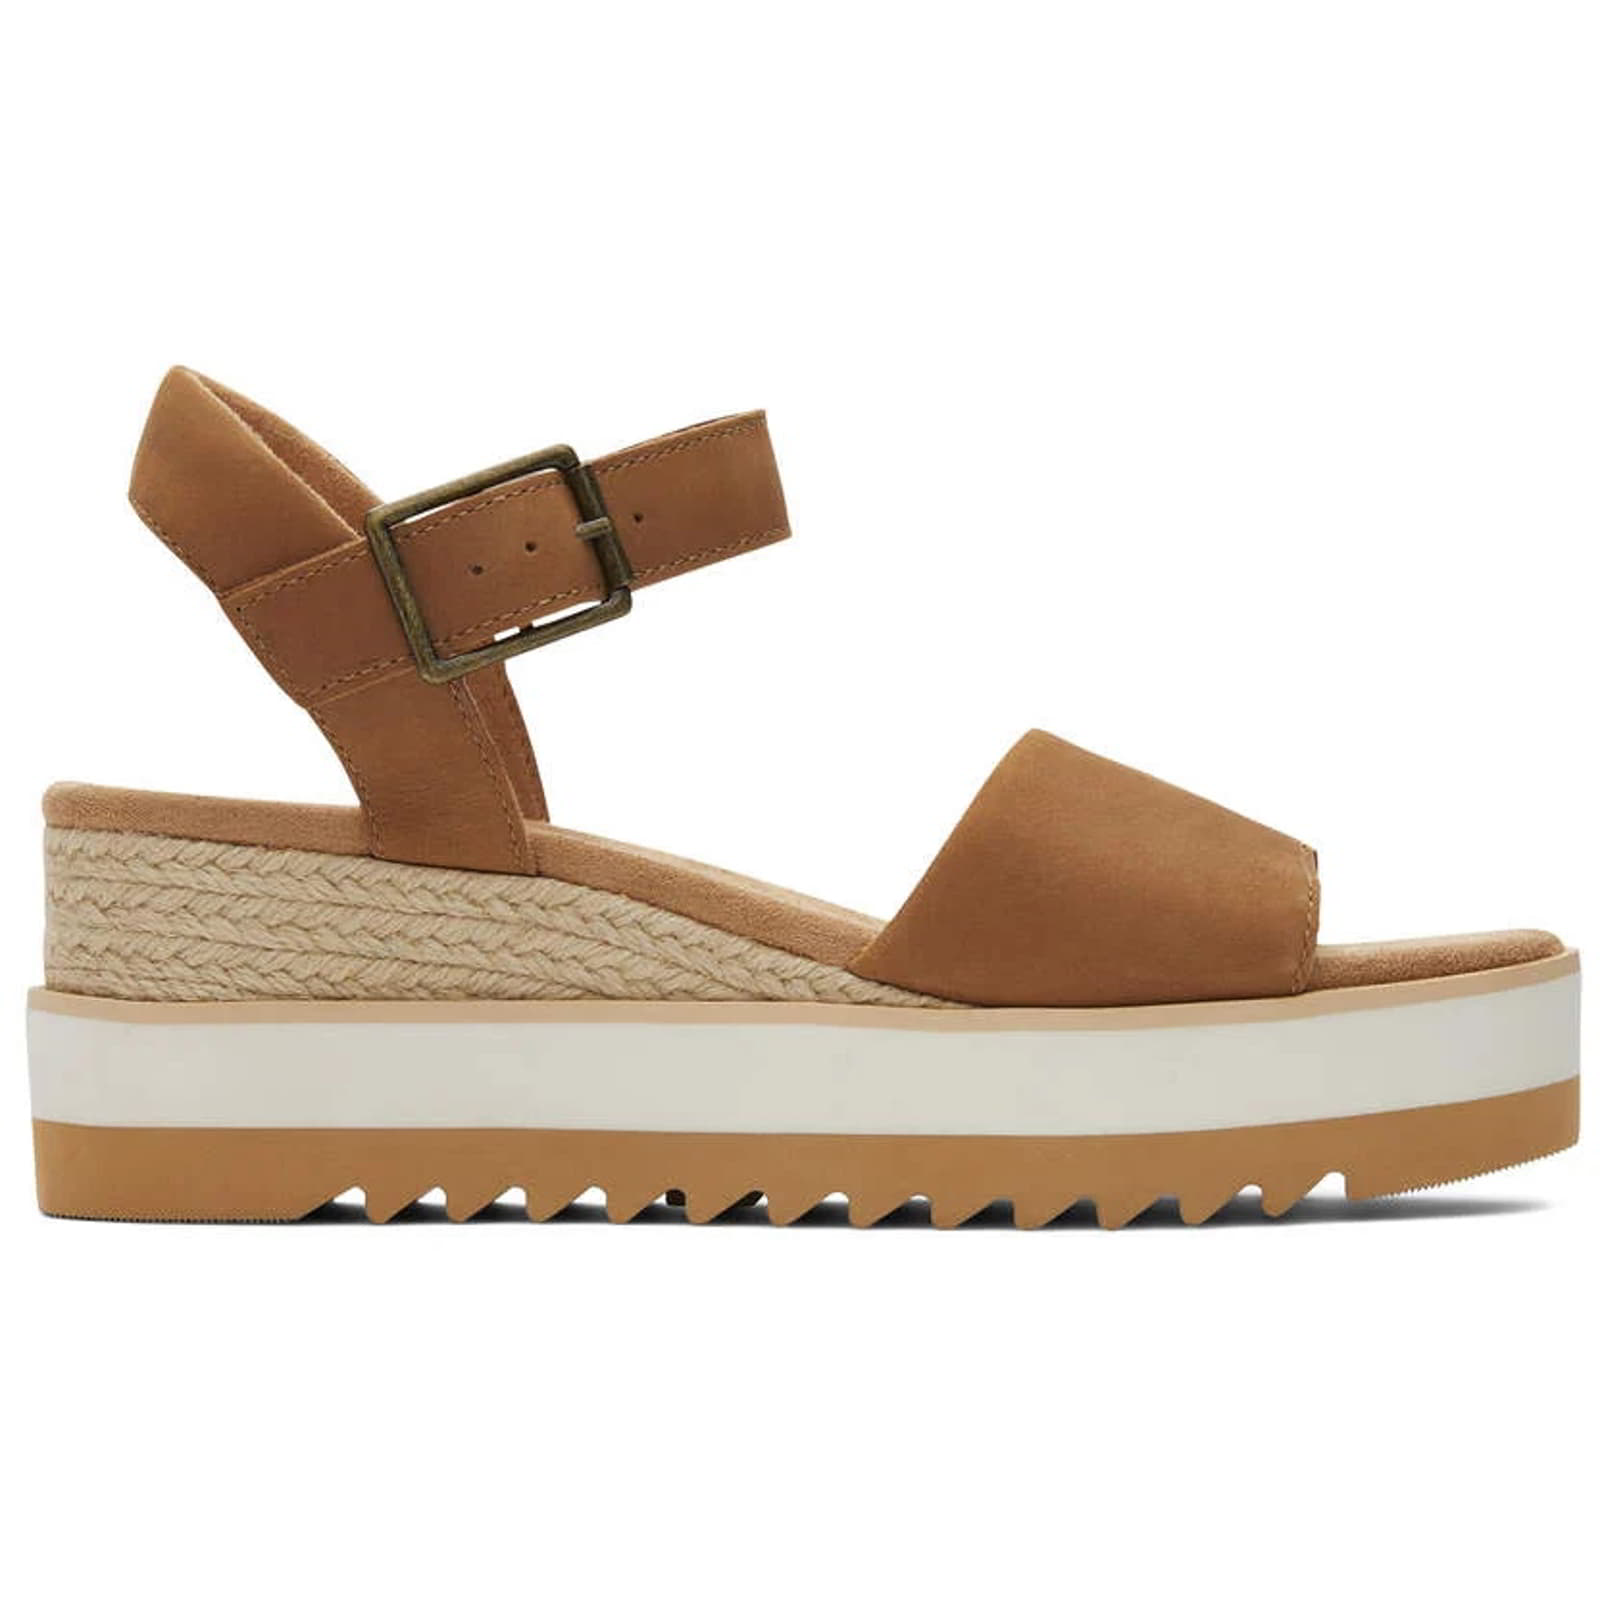 Toms Womens Diana Leather Wedge Sandals - UK 6